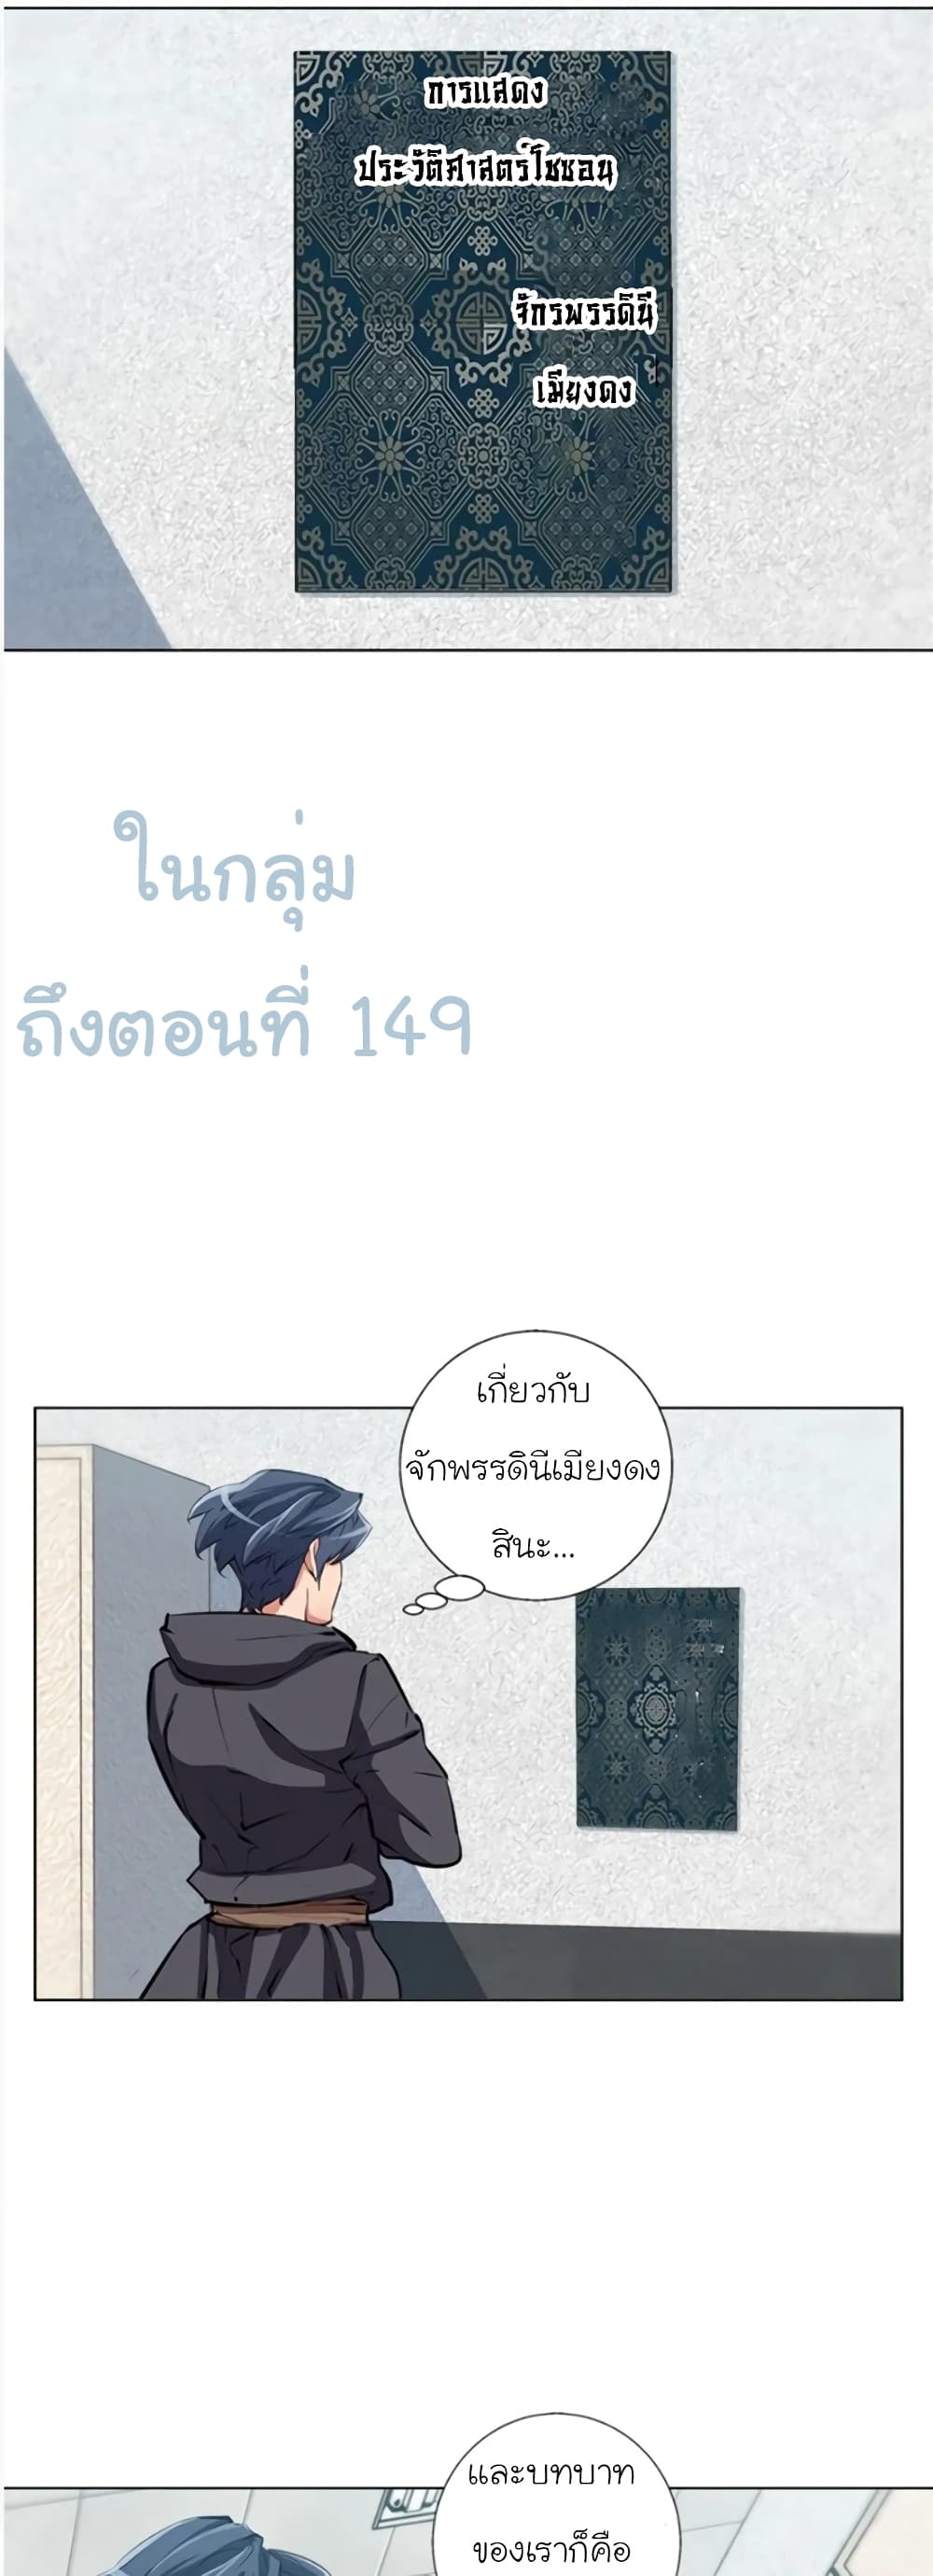 I Stack Experience Through Reading Books ตอนที่ 63 (6)